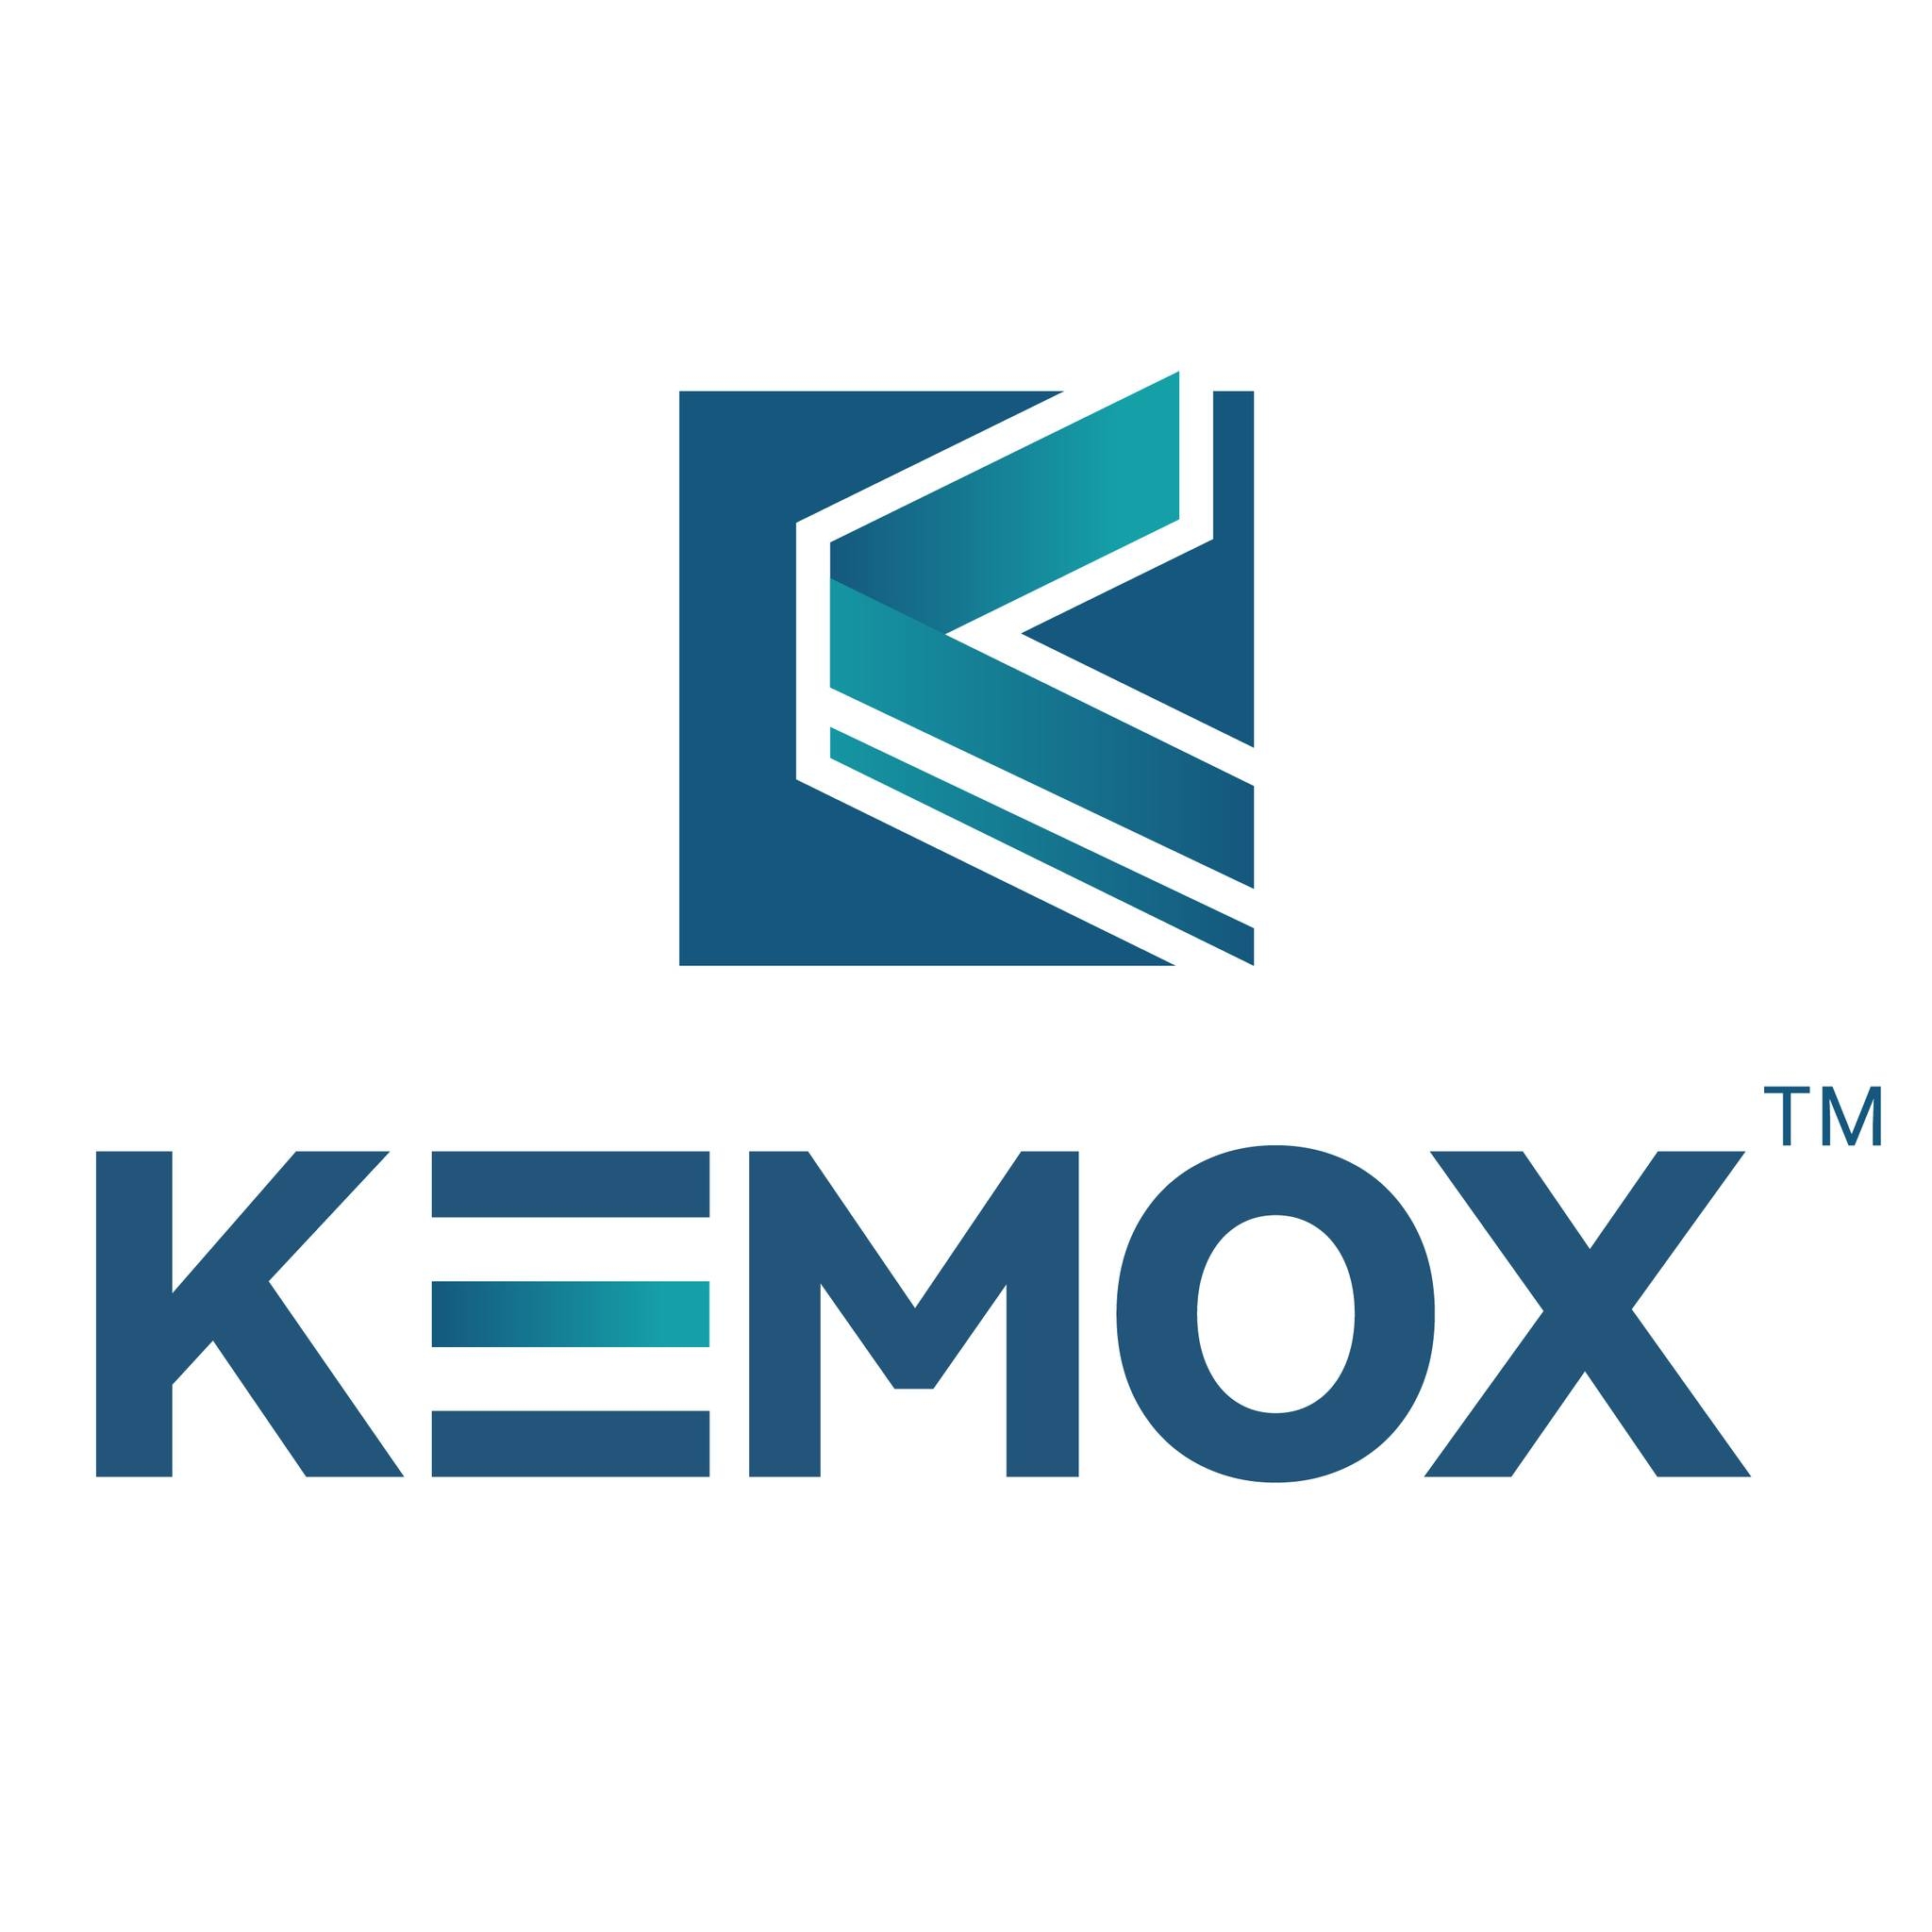 Kemox Cellulose (Shandong) Co.